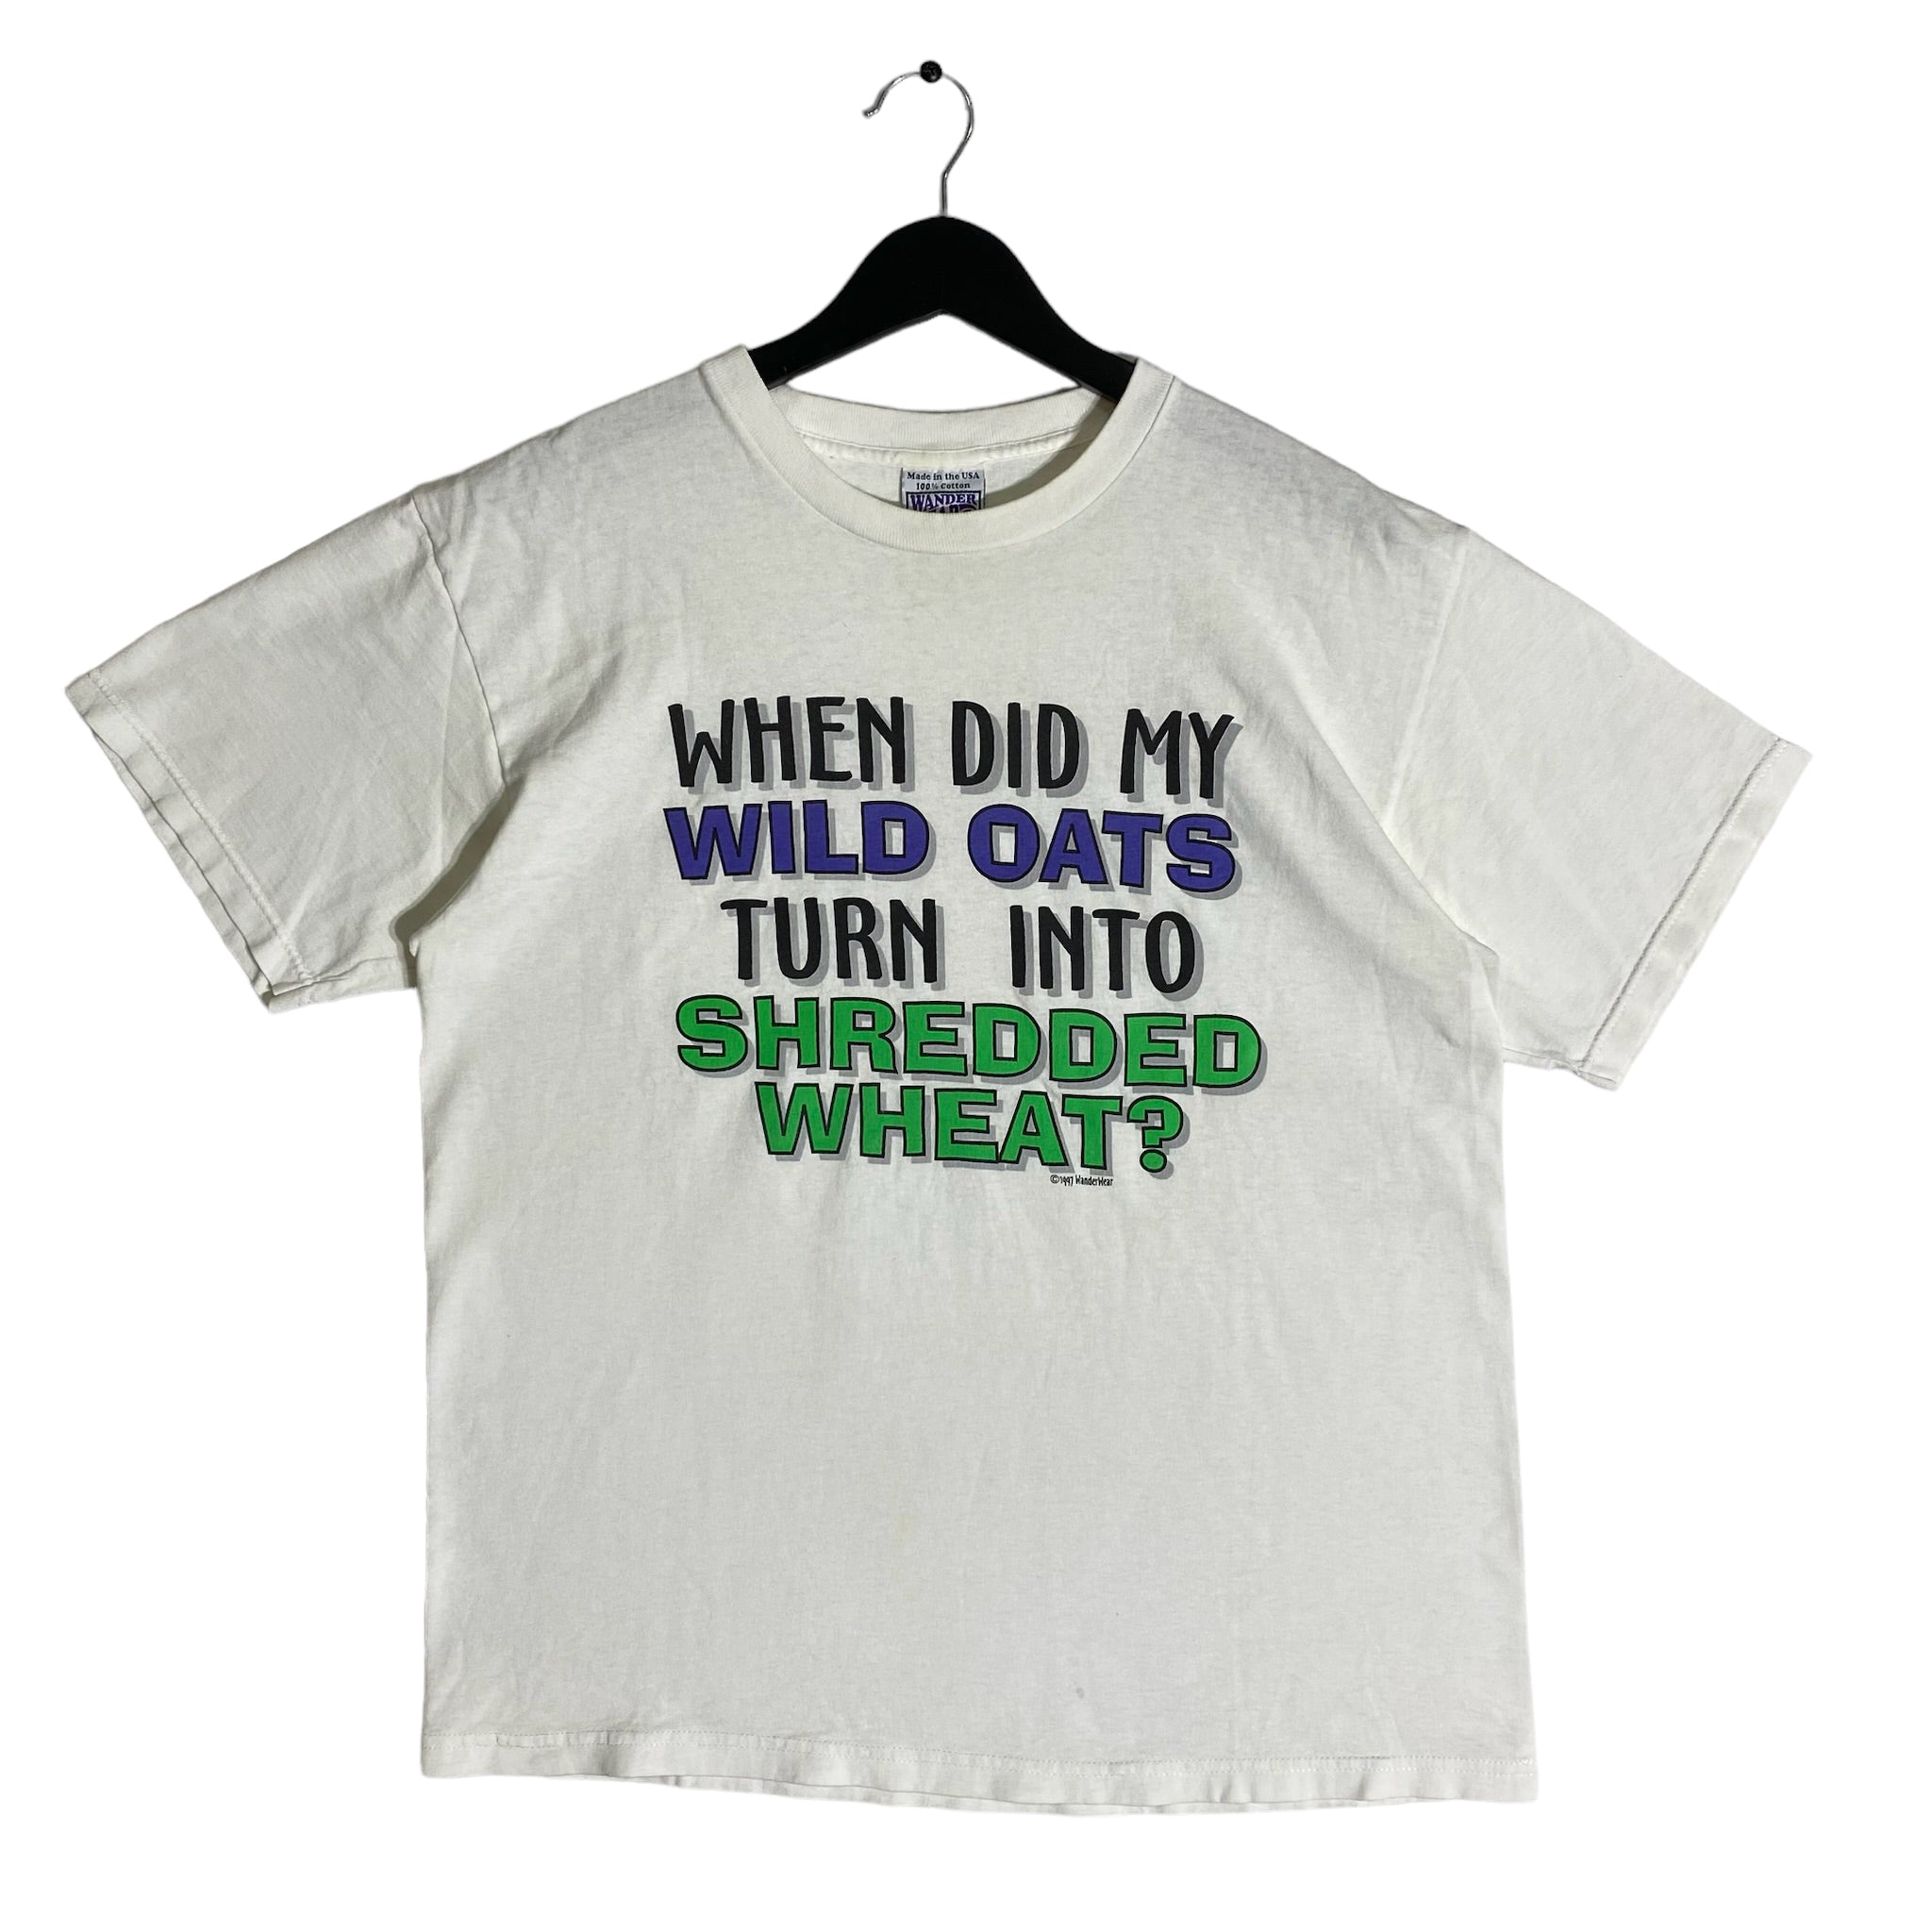 Vintage Adult Funny Quote Tee 90s